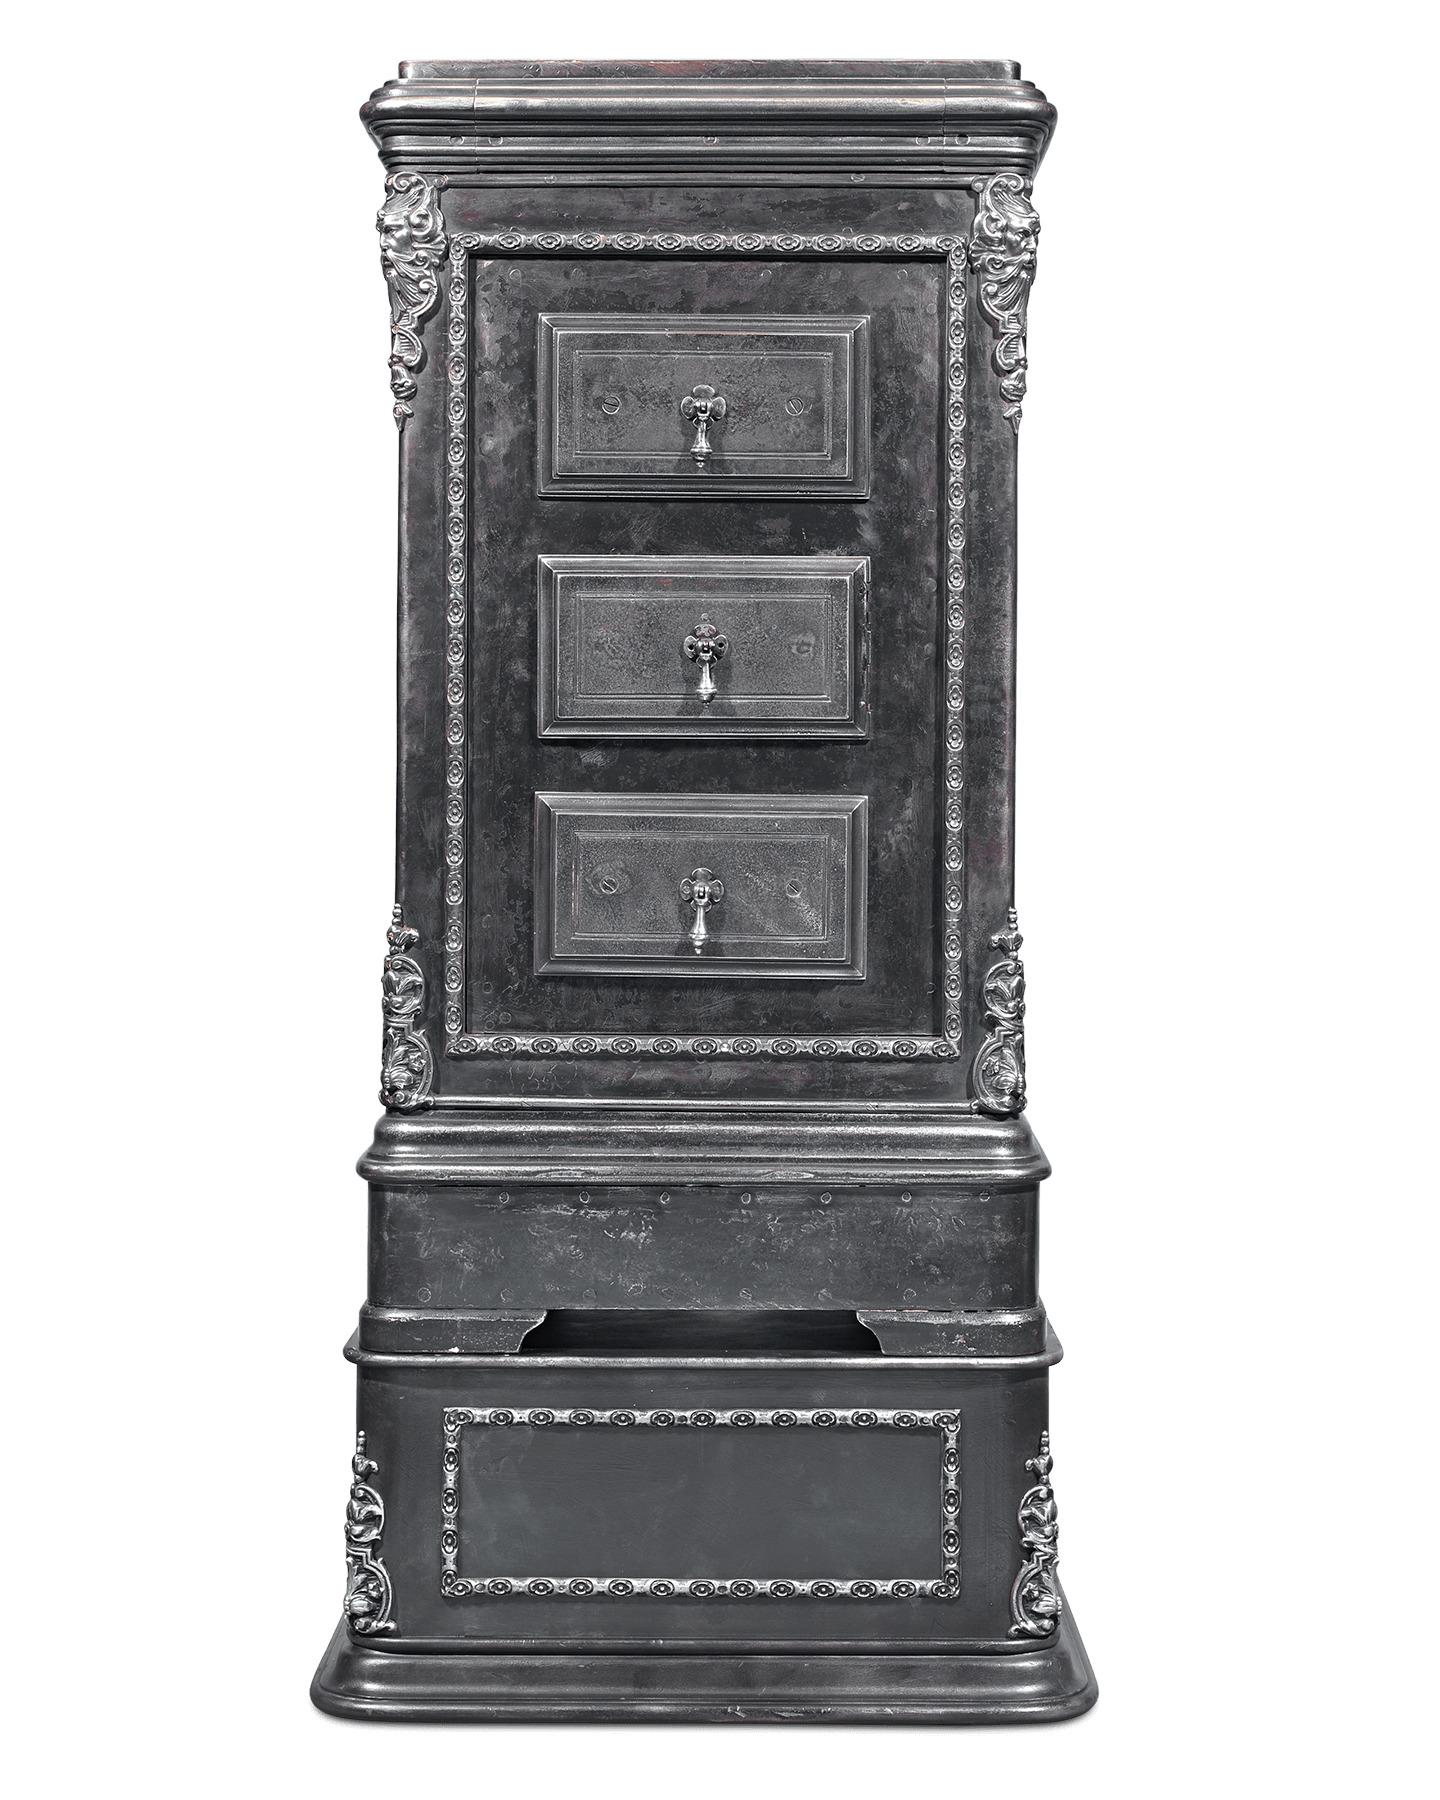 This Belgian cast-iron safe represents an important precursor to the modern combination lock. Crafted by the important makers L. Duvilers, the 19th century safe features a state-of-the-art hidden lock mechanism that is additionally secured by a